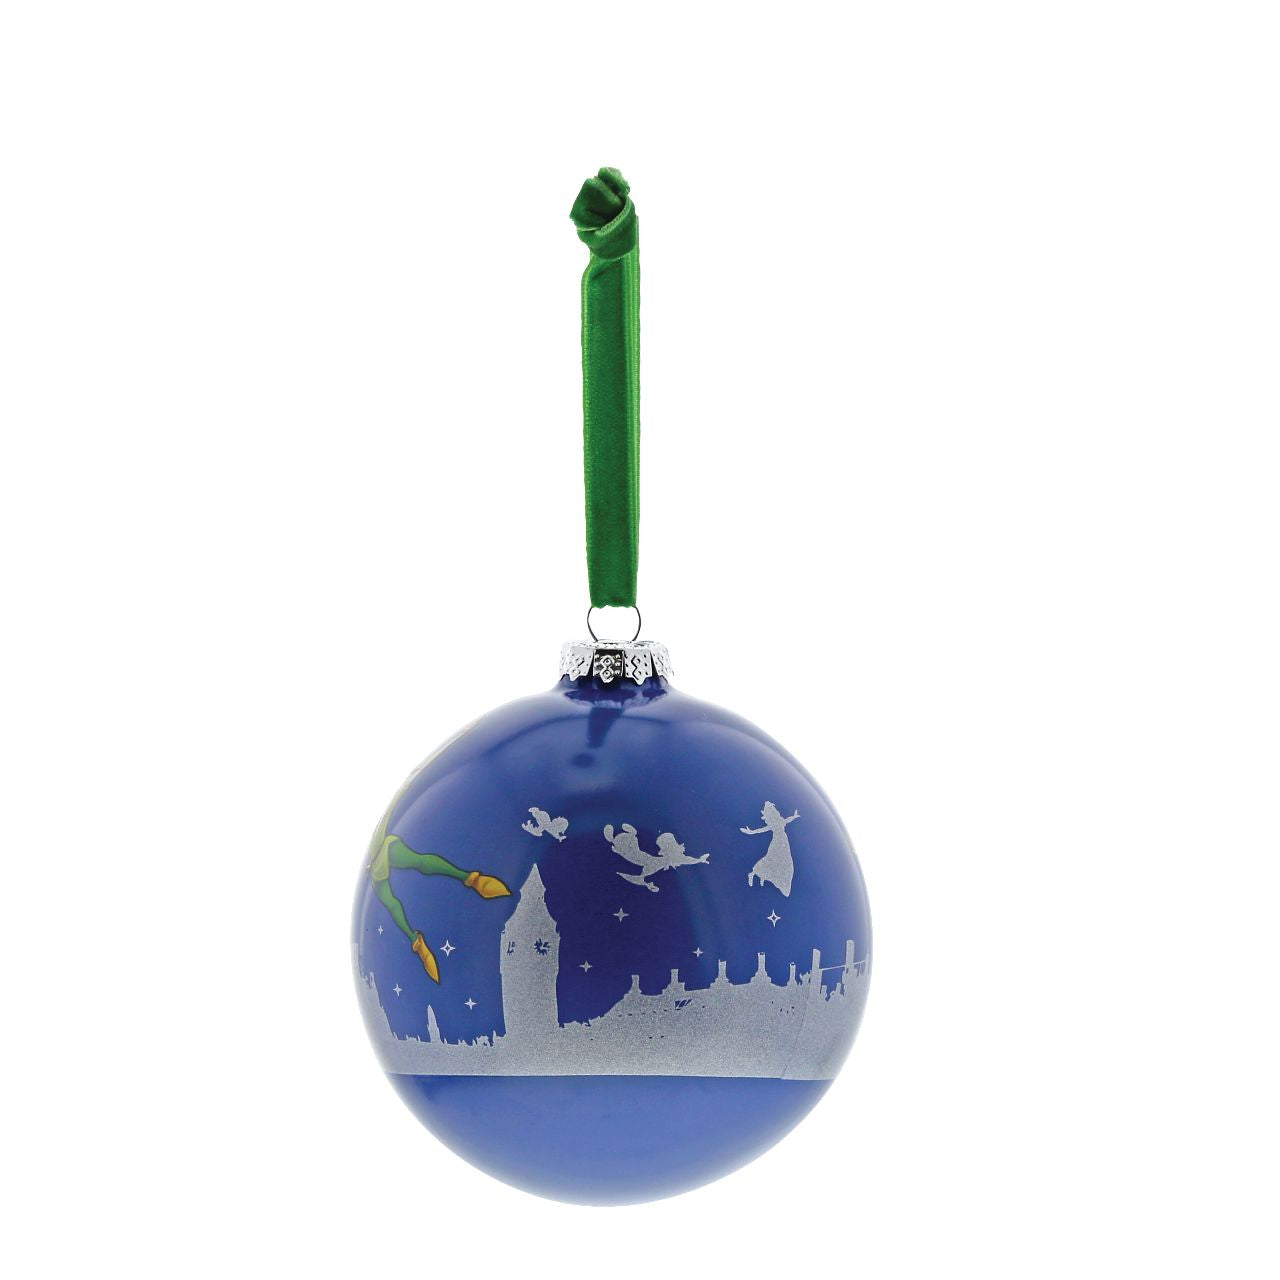 Disney Christmas Bauble Peter Pan You Can Fly  Peter Pan flys above the silhouette of London with Wendy and the boys in this beautiful glass bauble. This treasured keepsake would make a lovely unique gift for a friend, or a self-purchase to brighten up the home. Presented in a branded window box.